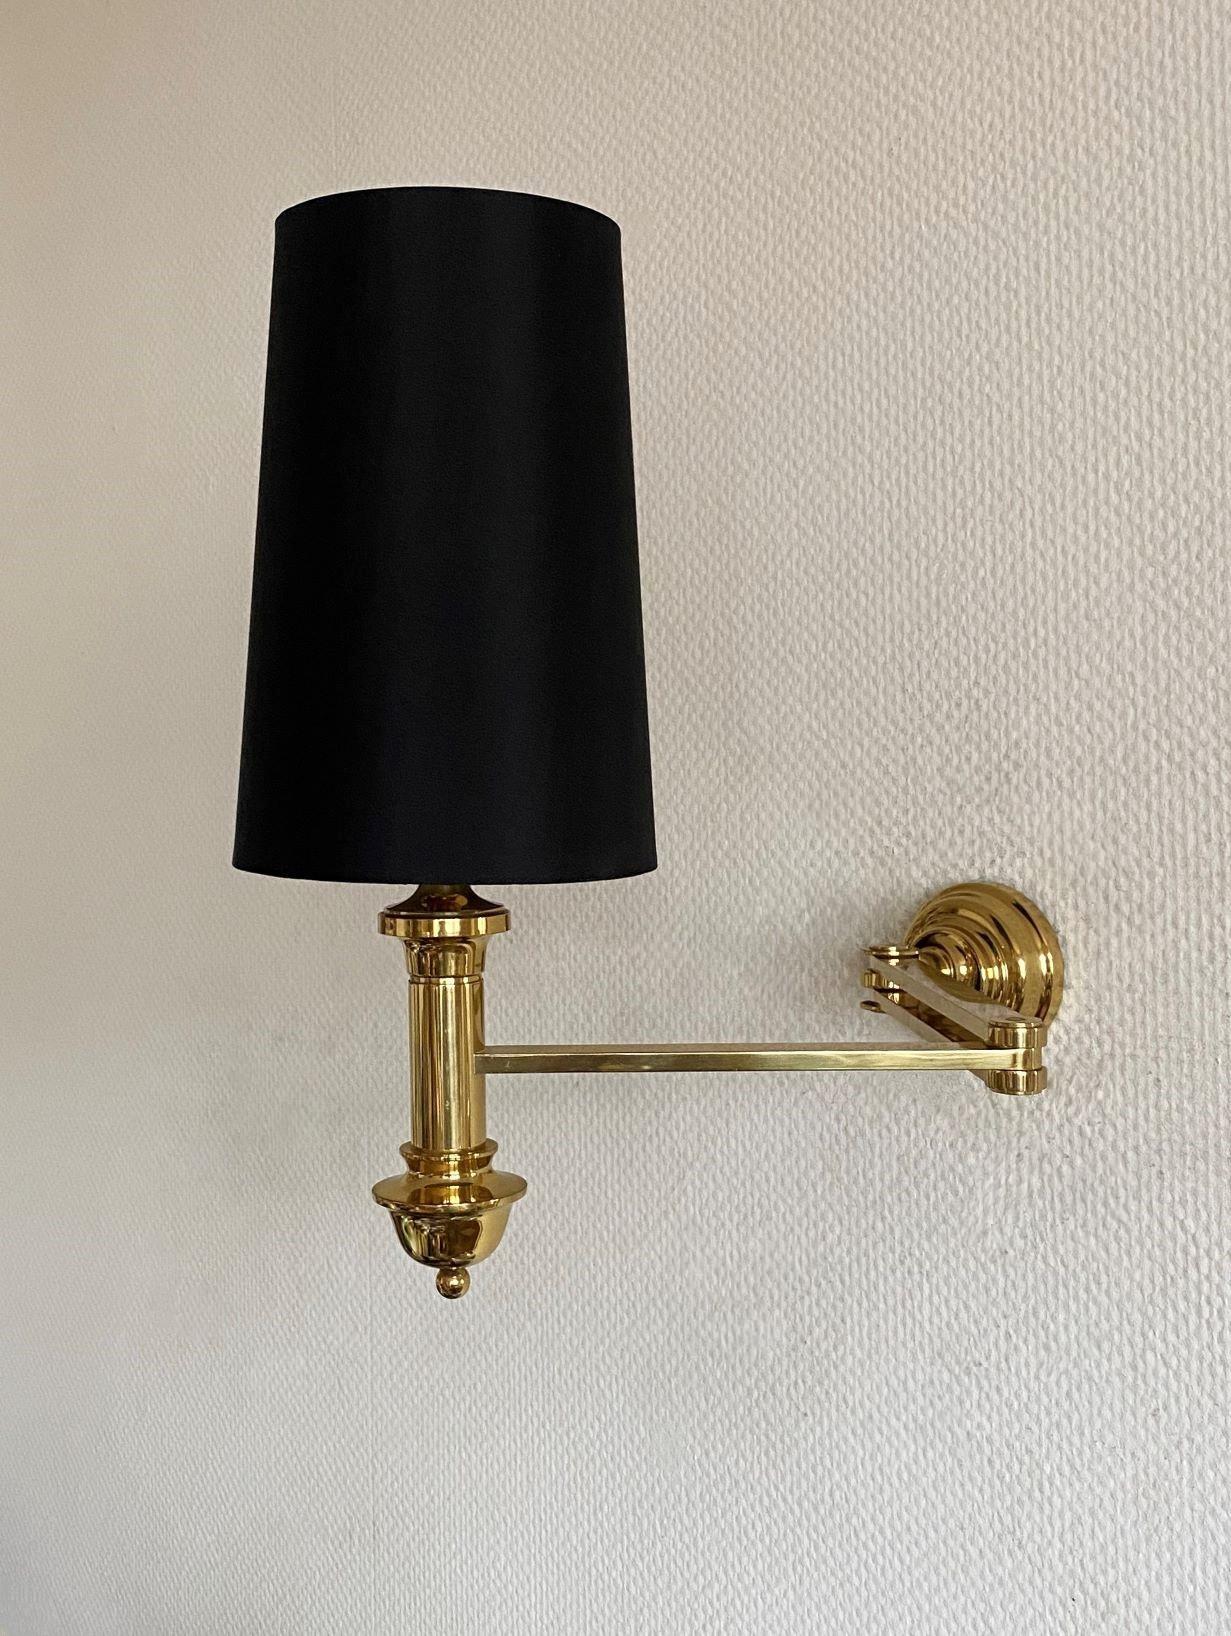 Pair of Brass Swing Arm Wall Lights, 1960s For Sale 6